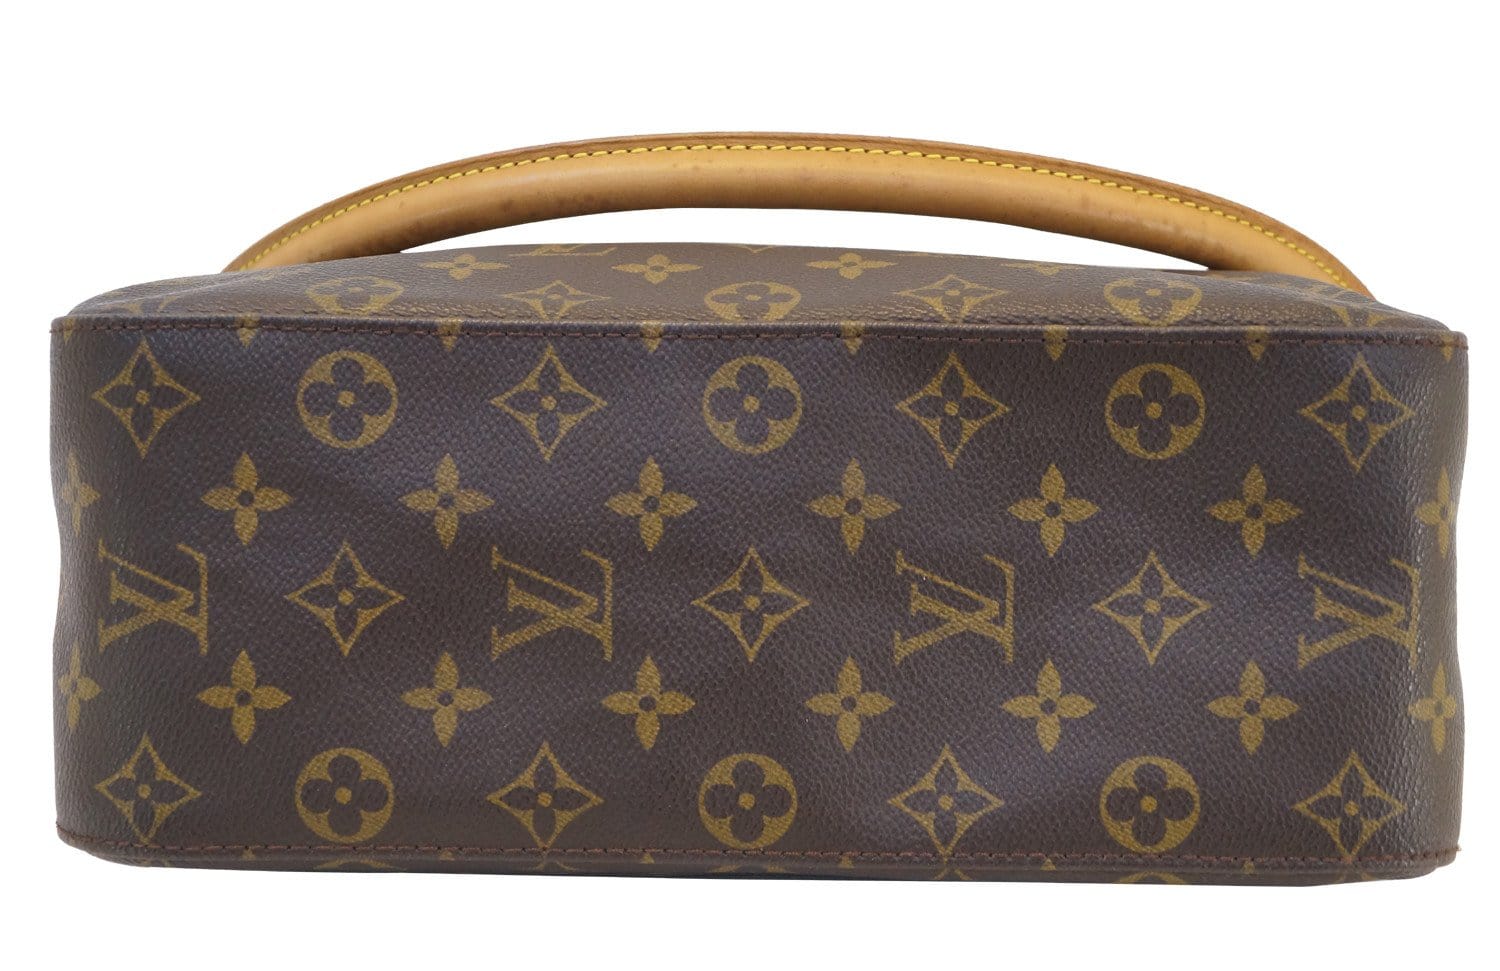 Louis Vuitton Loop, Gallery posted by Jeanevé